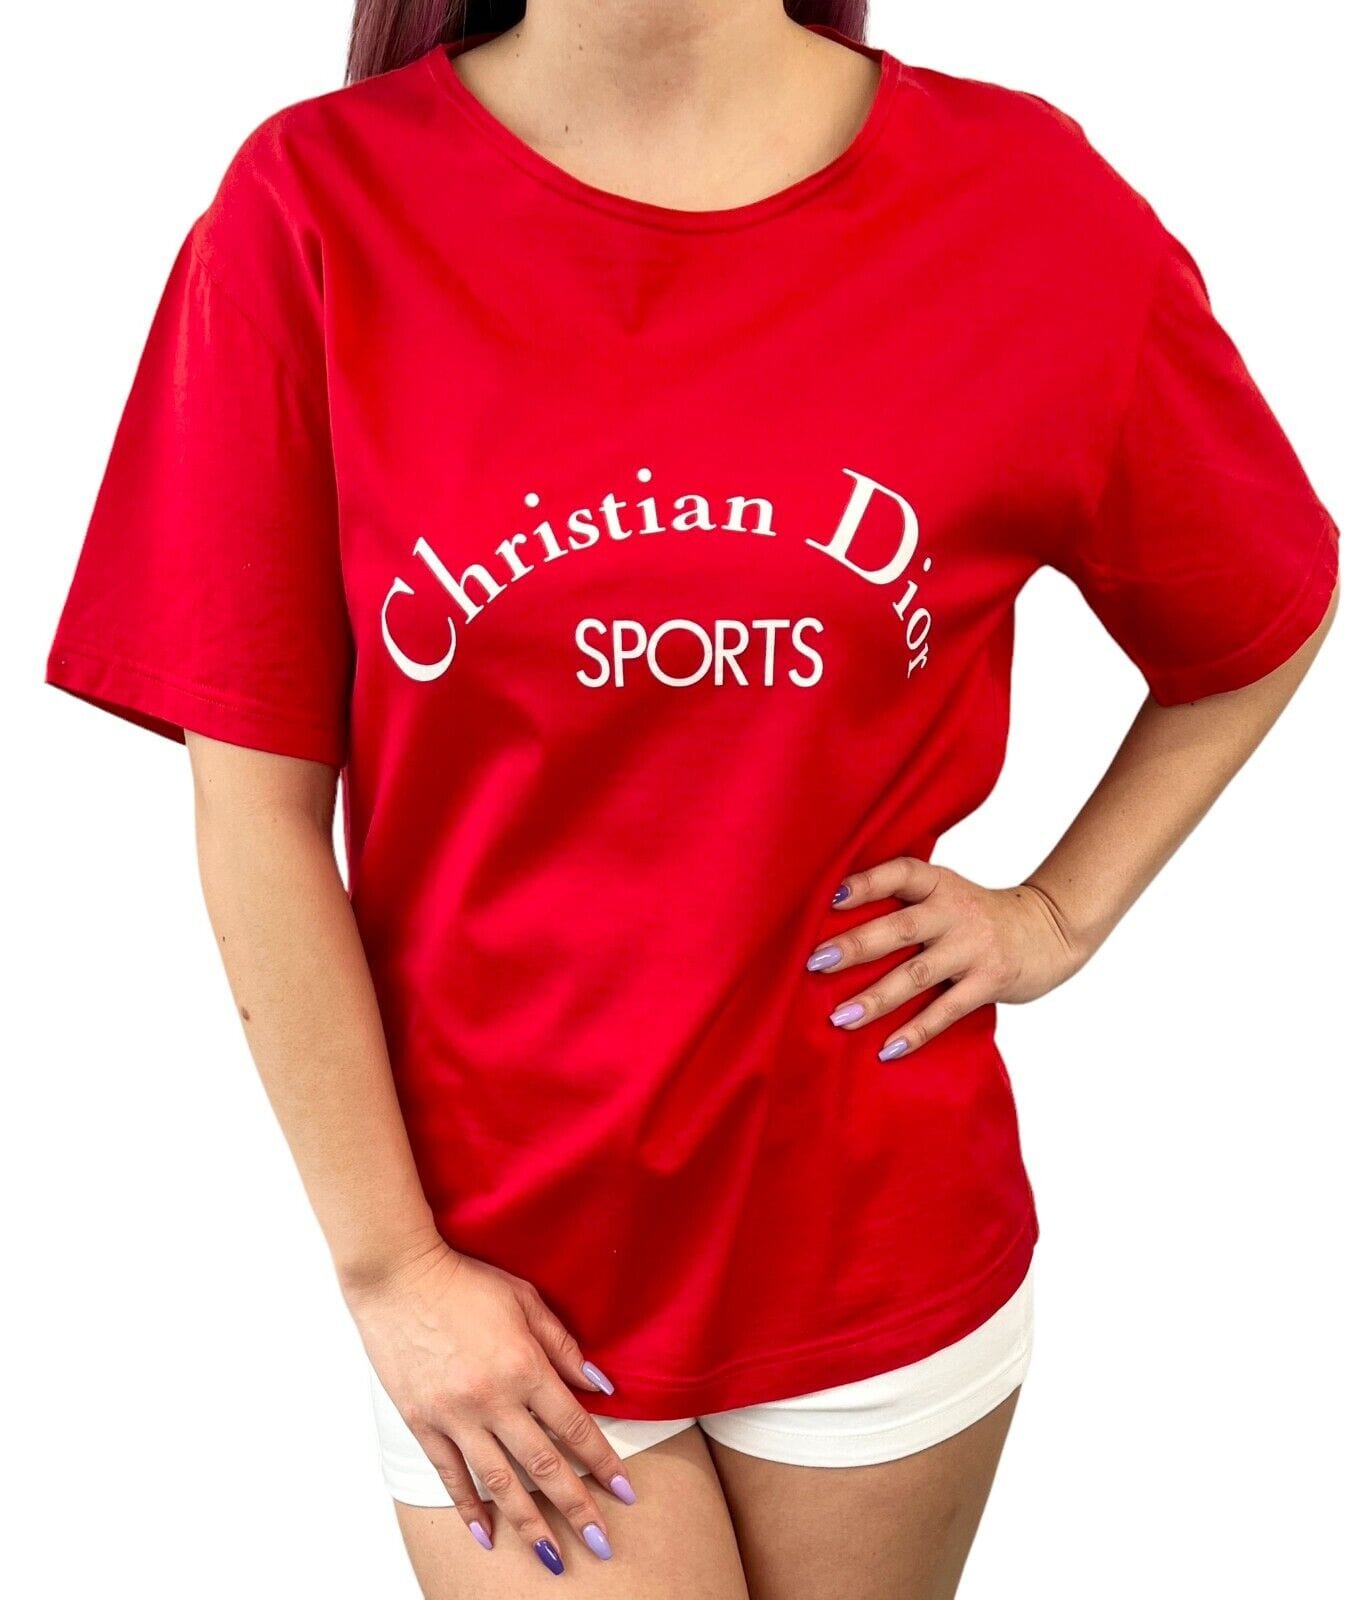 Christian Dior Christian Dior Vintage Logo Letter T-shirts #M Sport Top Red Cotton